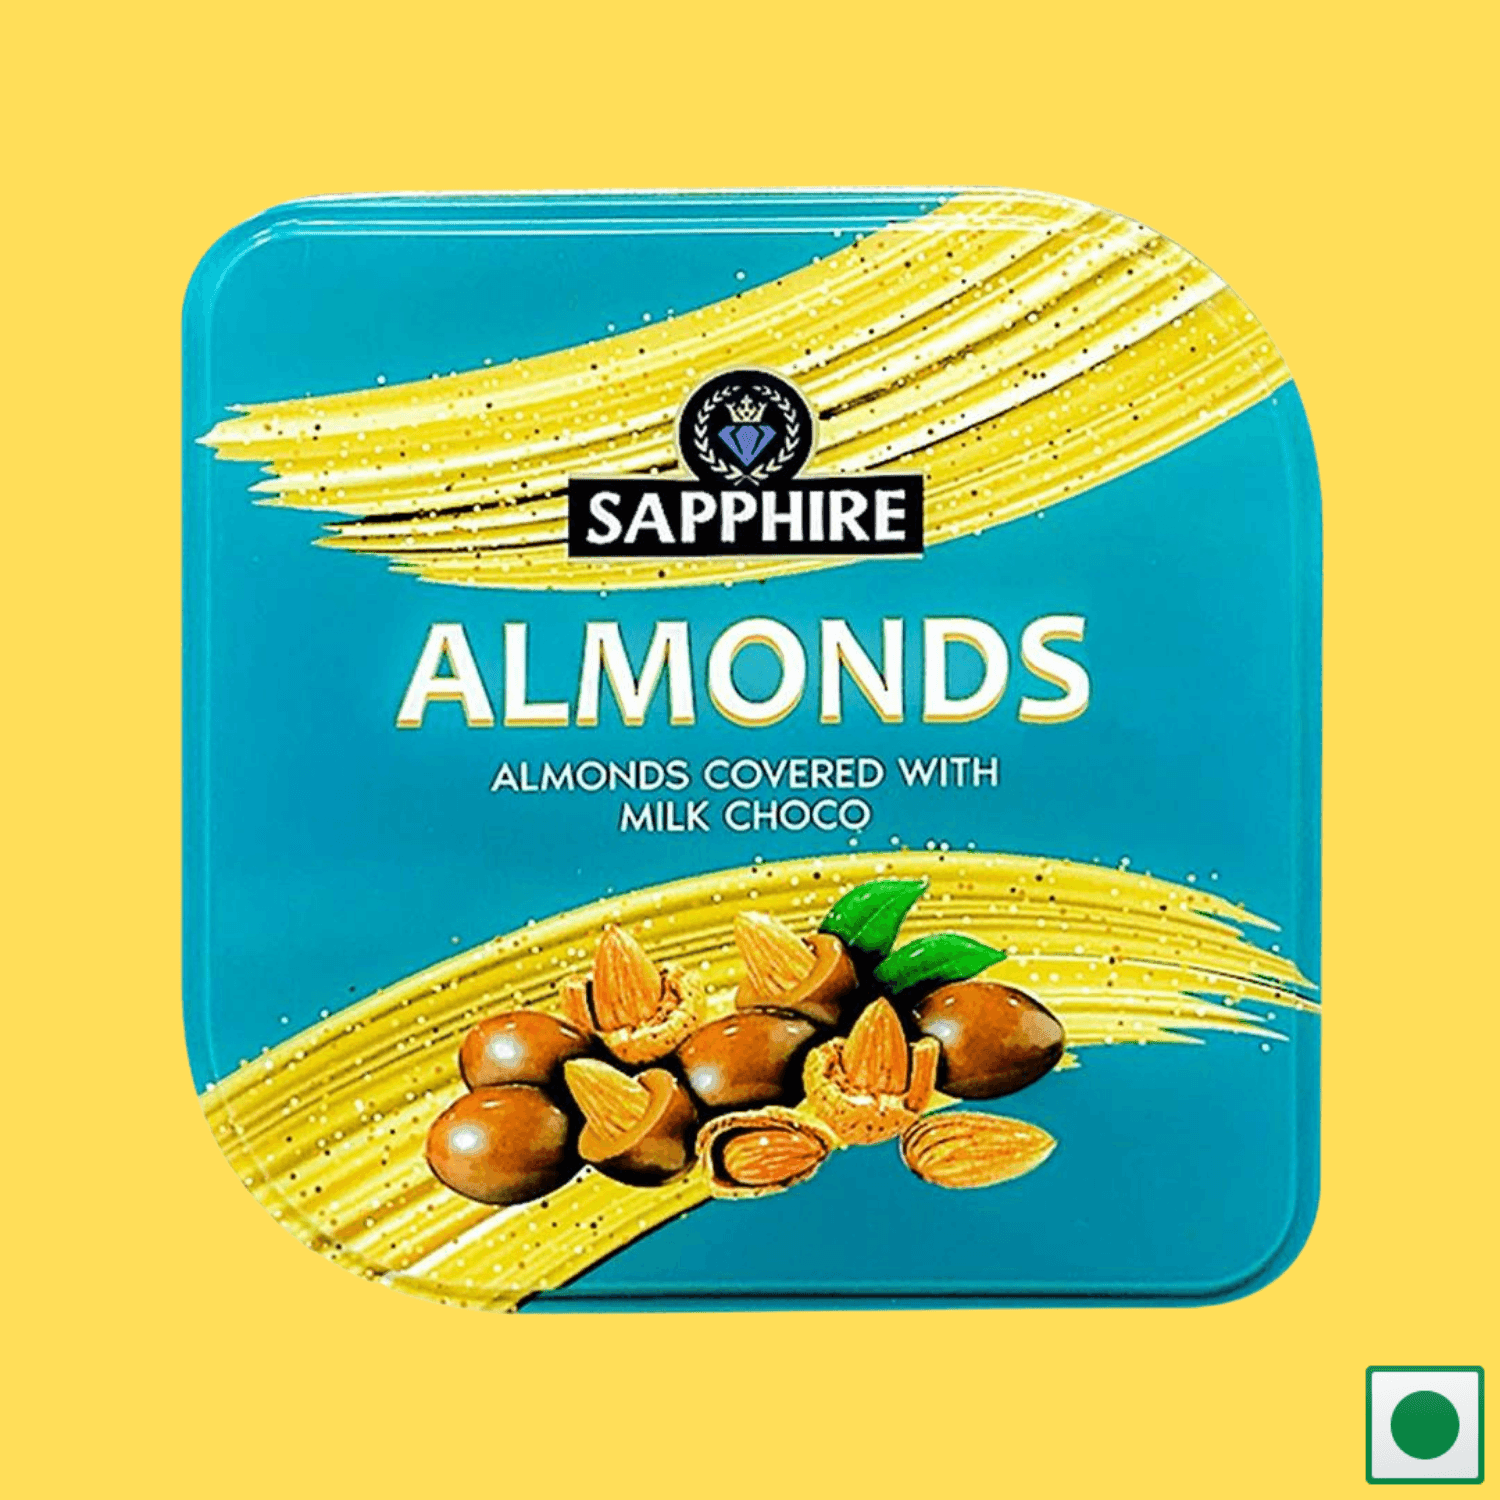 Sapphire Almonds Covered with Milk Choco, 90g (Imported) - Super 7 Mart